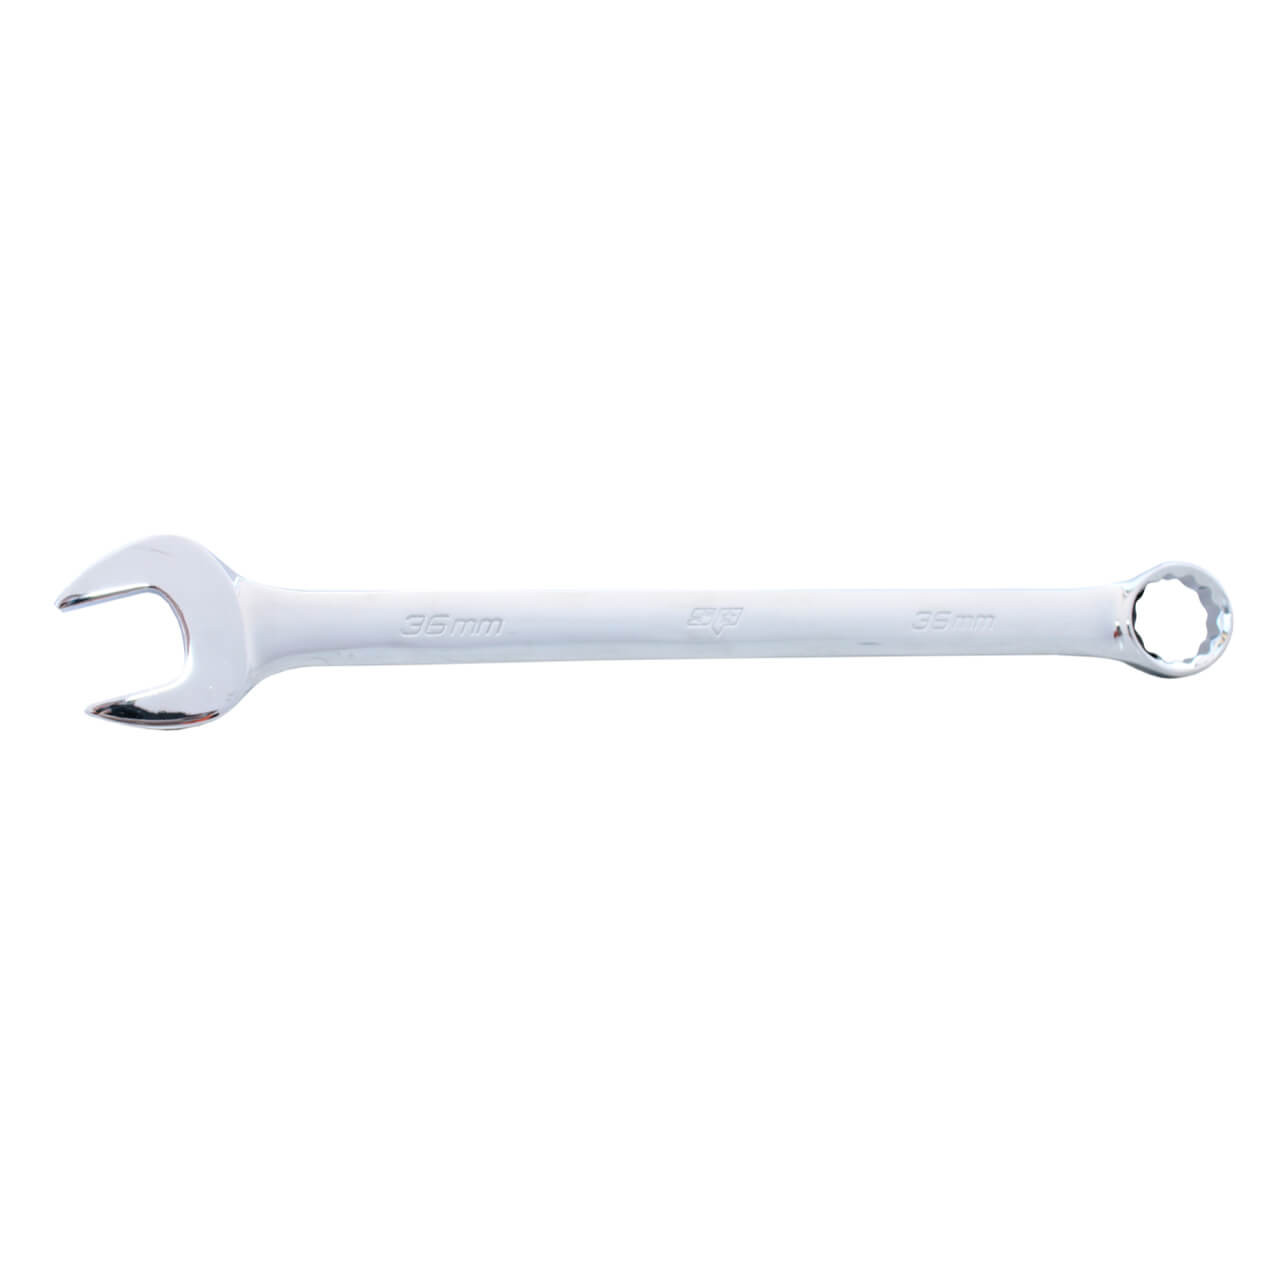 SP Tools 50mm Combination ROE Spanner Metric